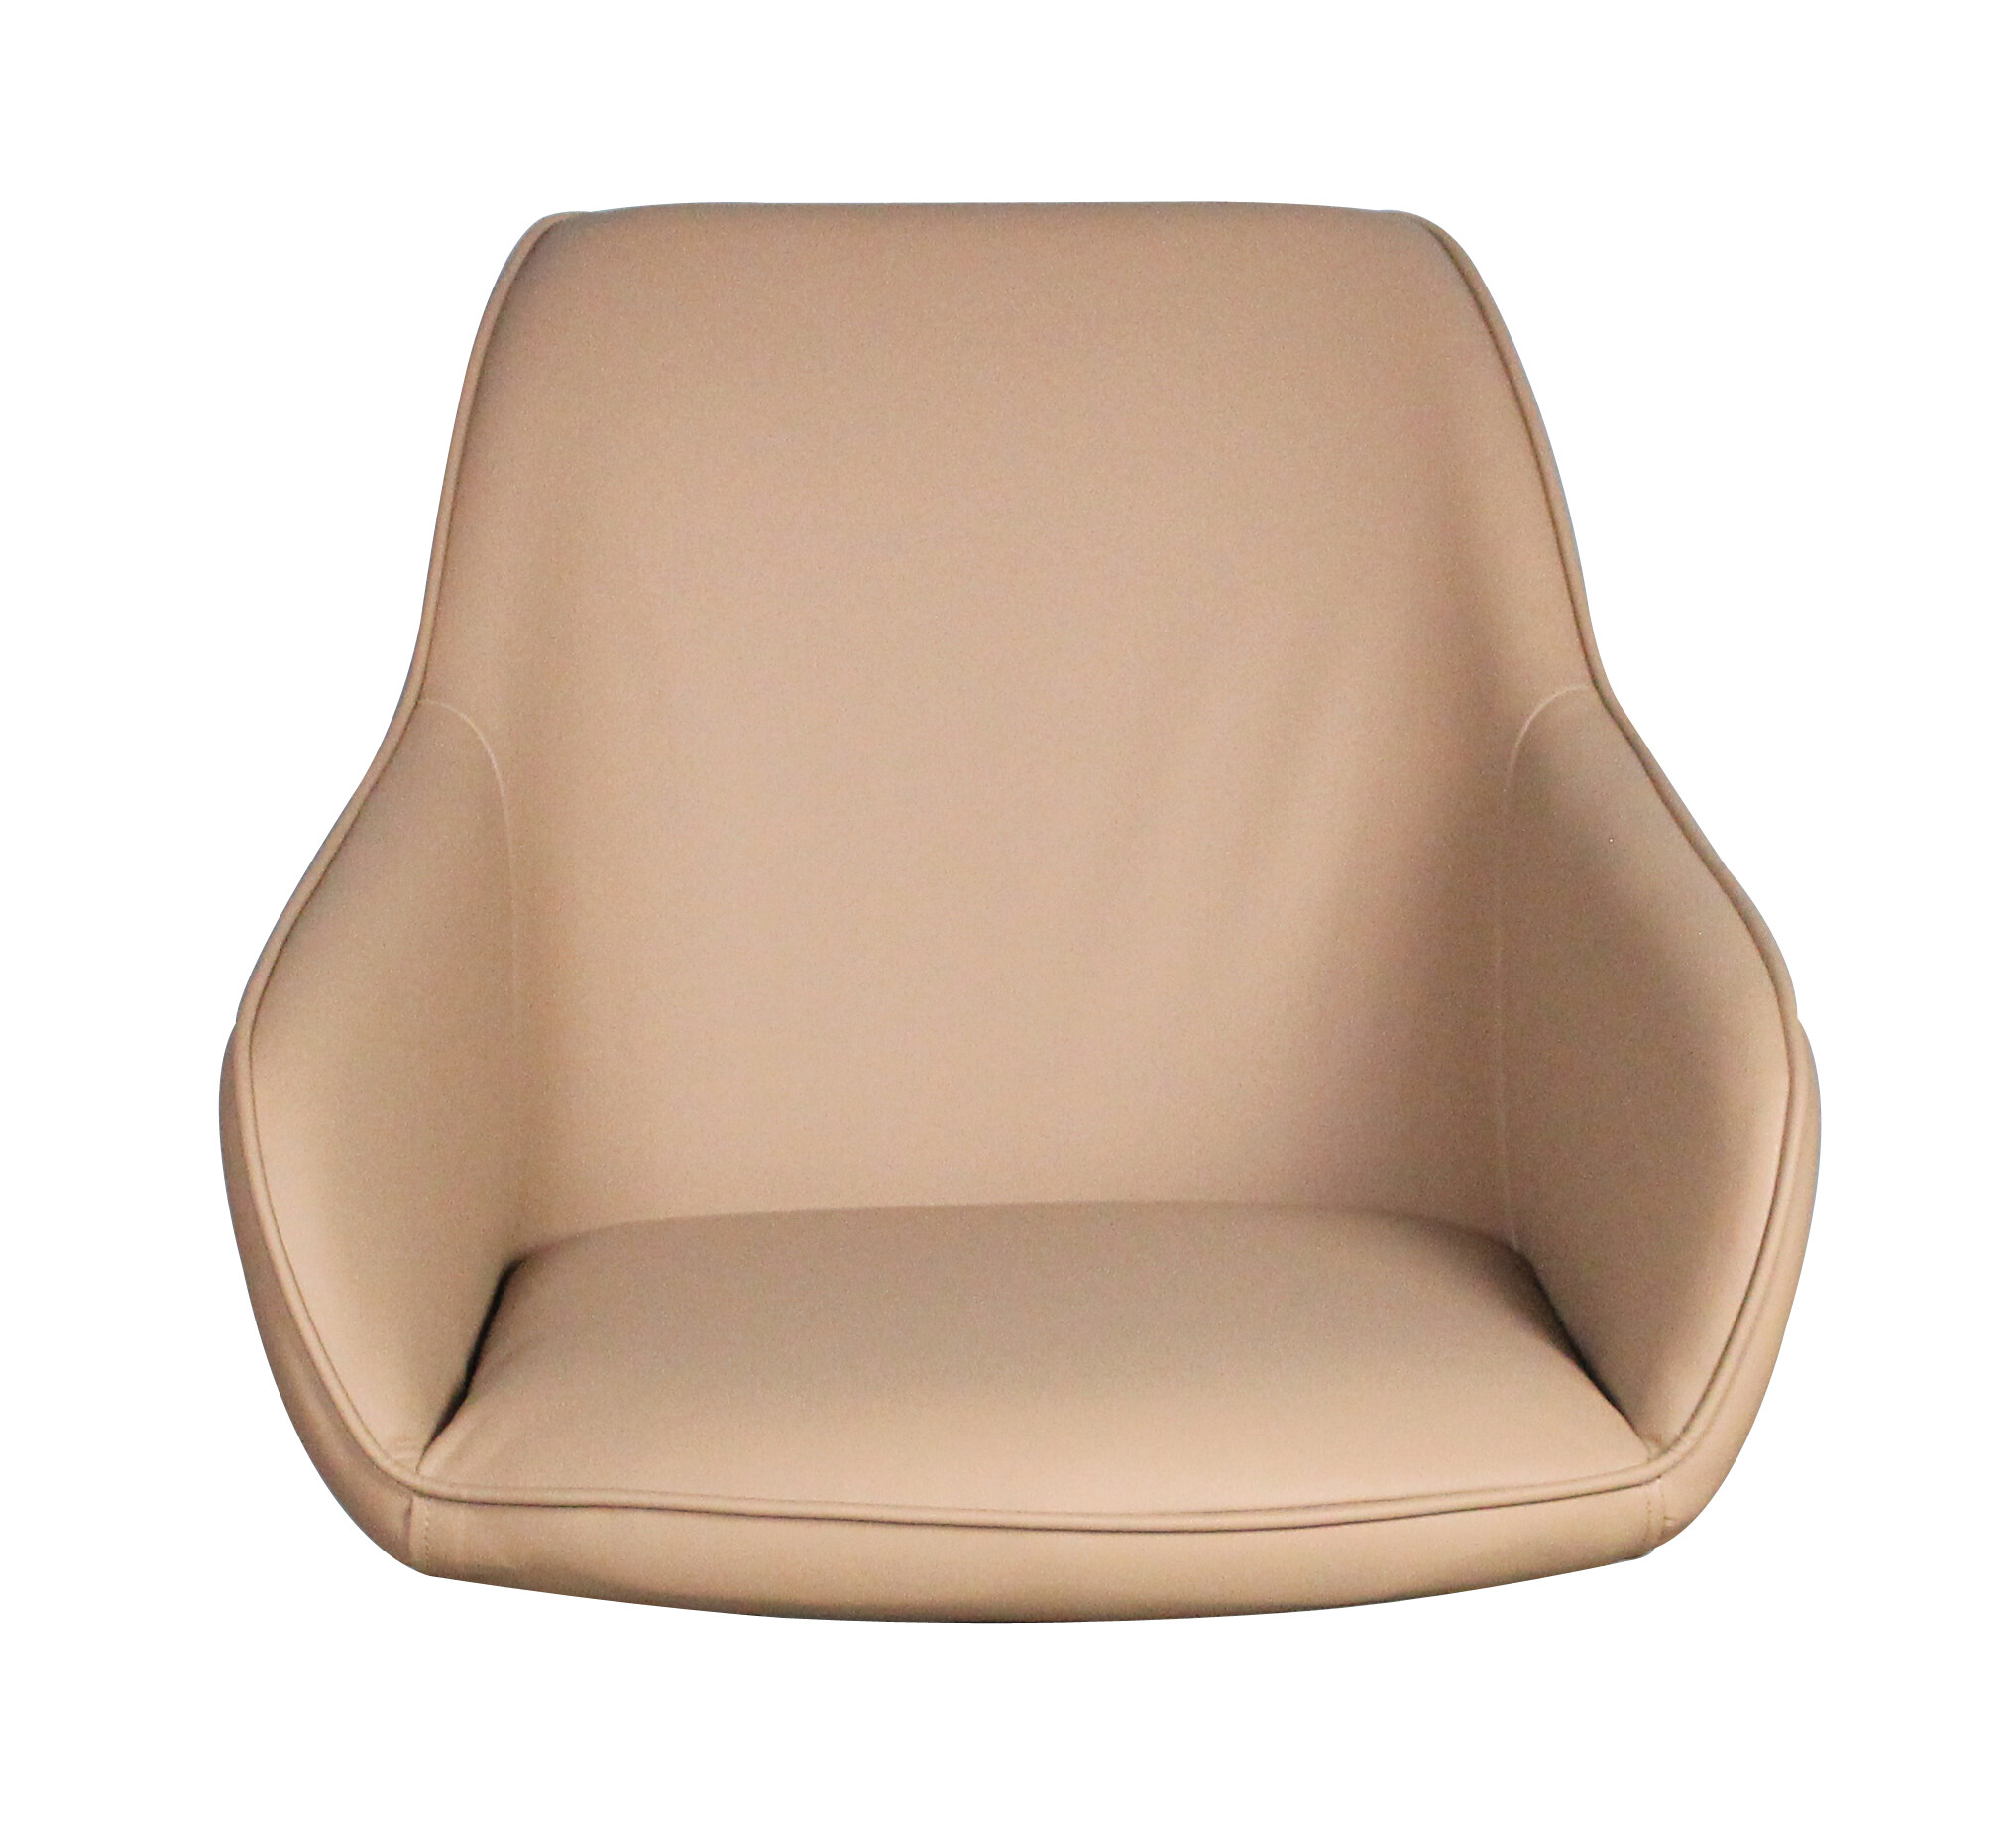 chair parts manufacturer, china office chair parts